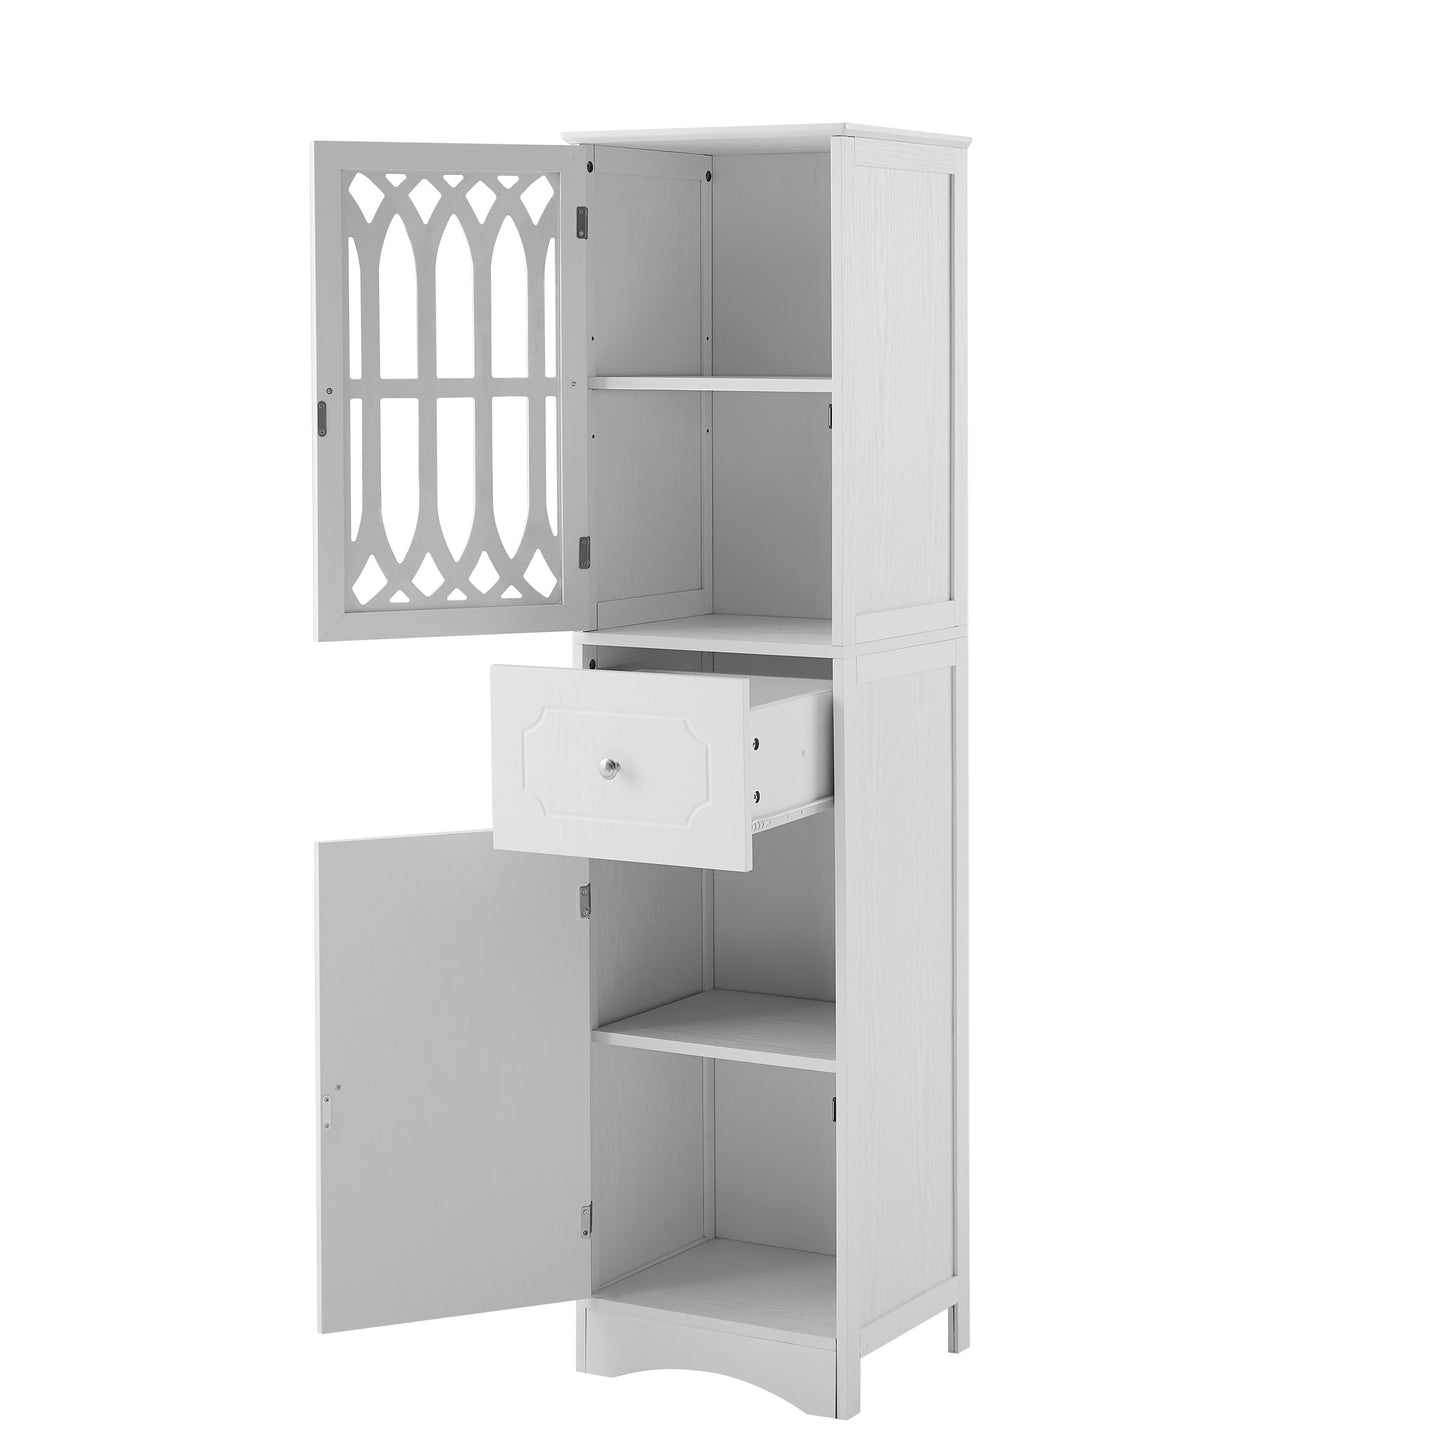 Tall Bathroom Cabinet, Freestanding Storage Cabinet with Drawer and Doors, MDF Board, Acrylic Door, Adjustable Shelf, White